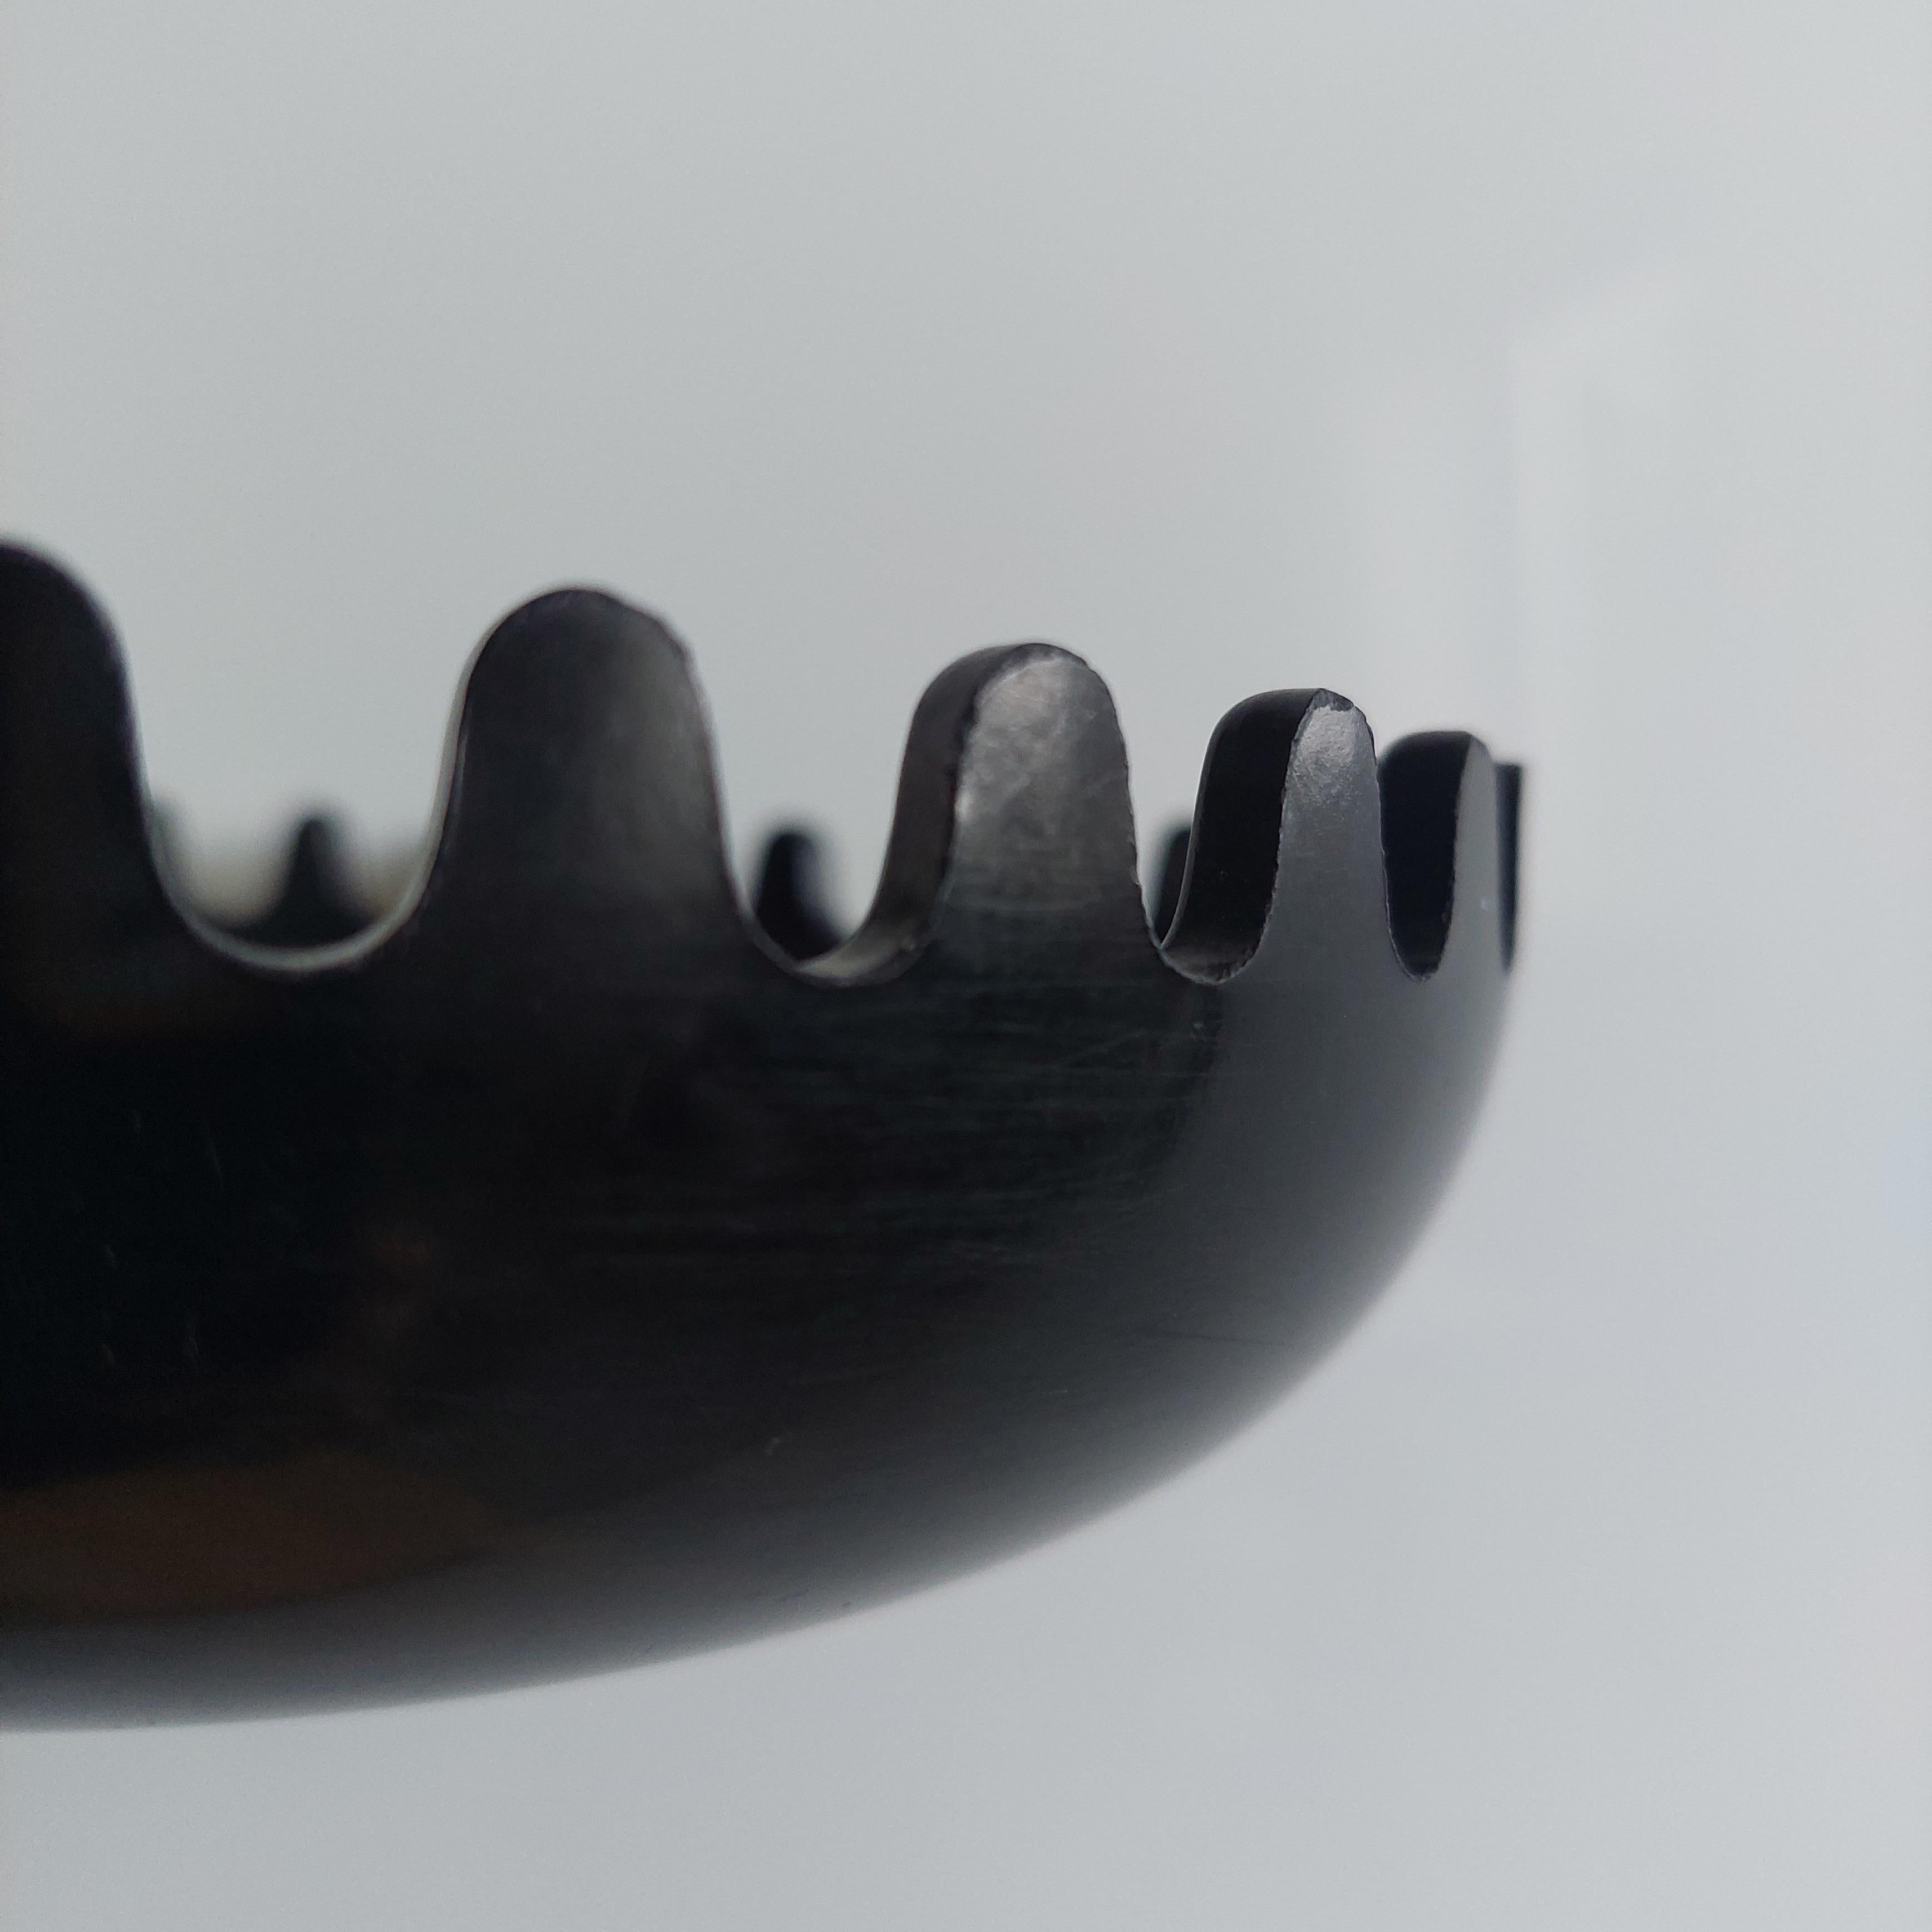 Space age Black Mebel Clam Ashtray Bowl by Alan Fletcher, 1970 For Sale 1